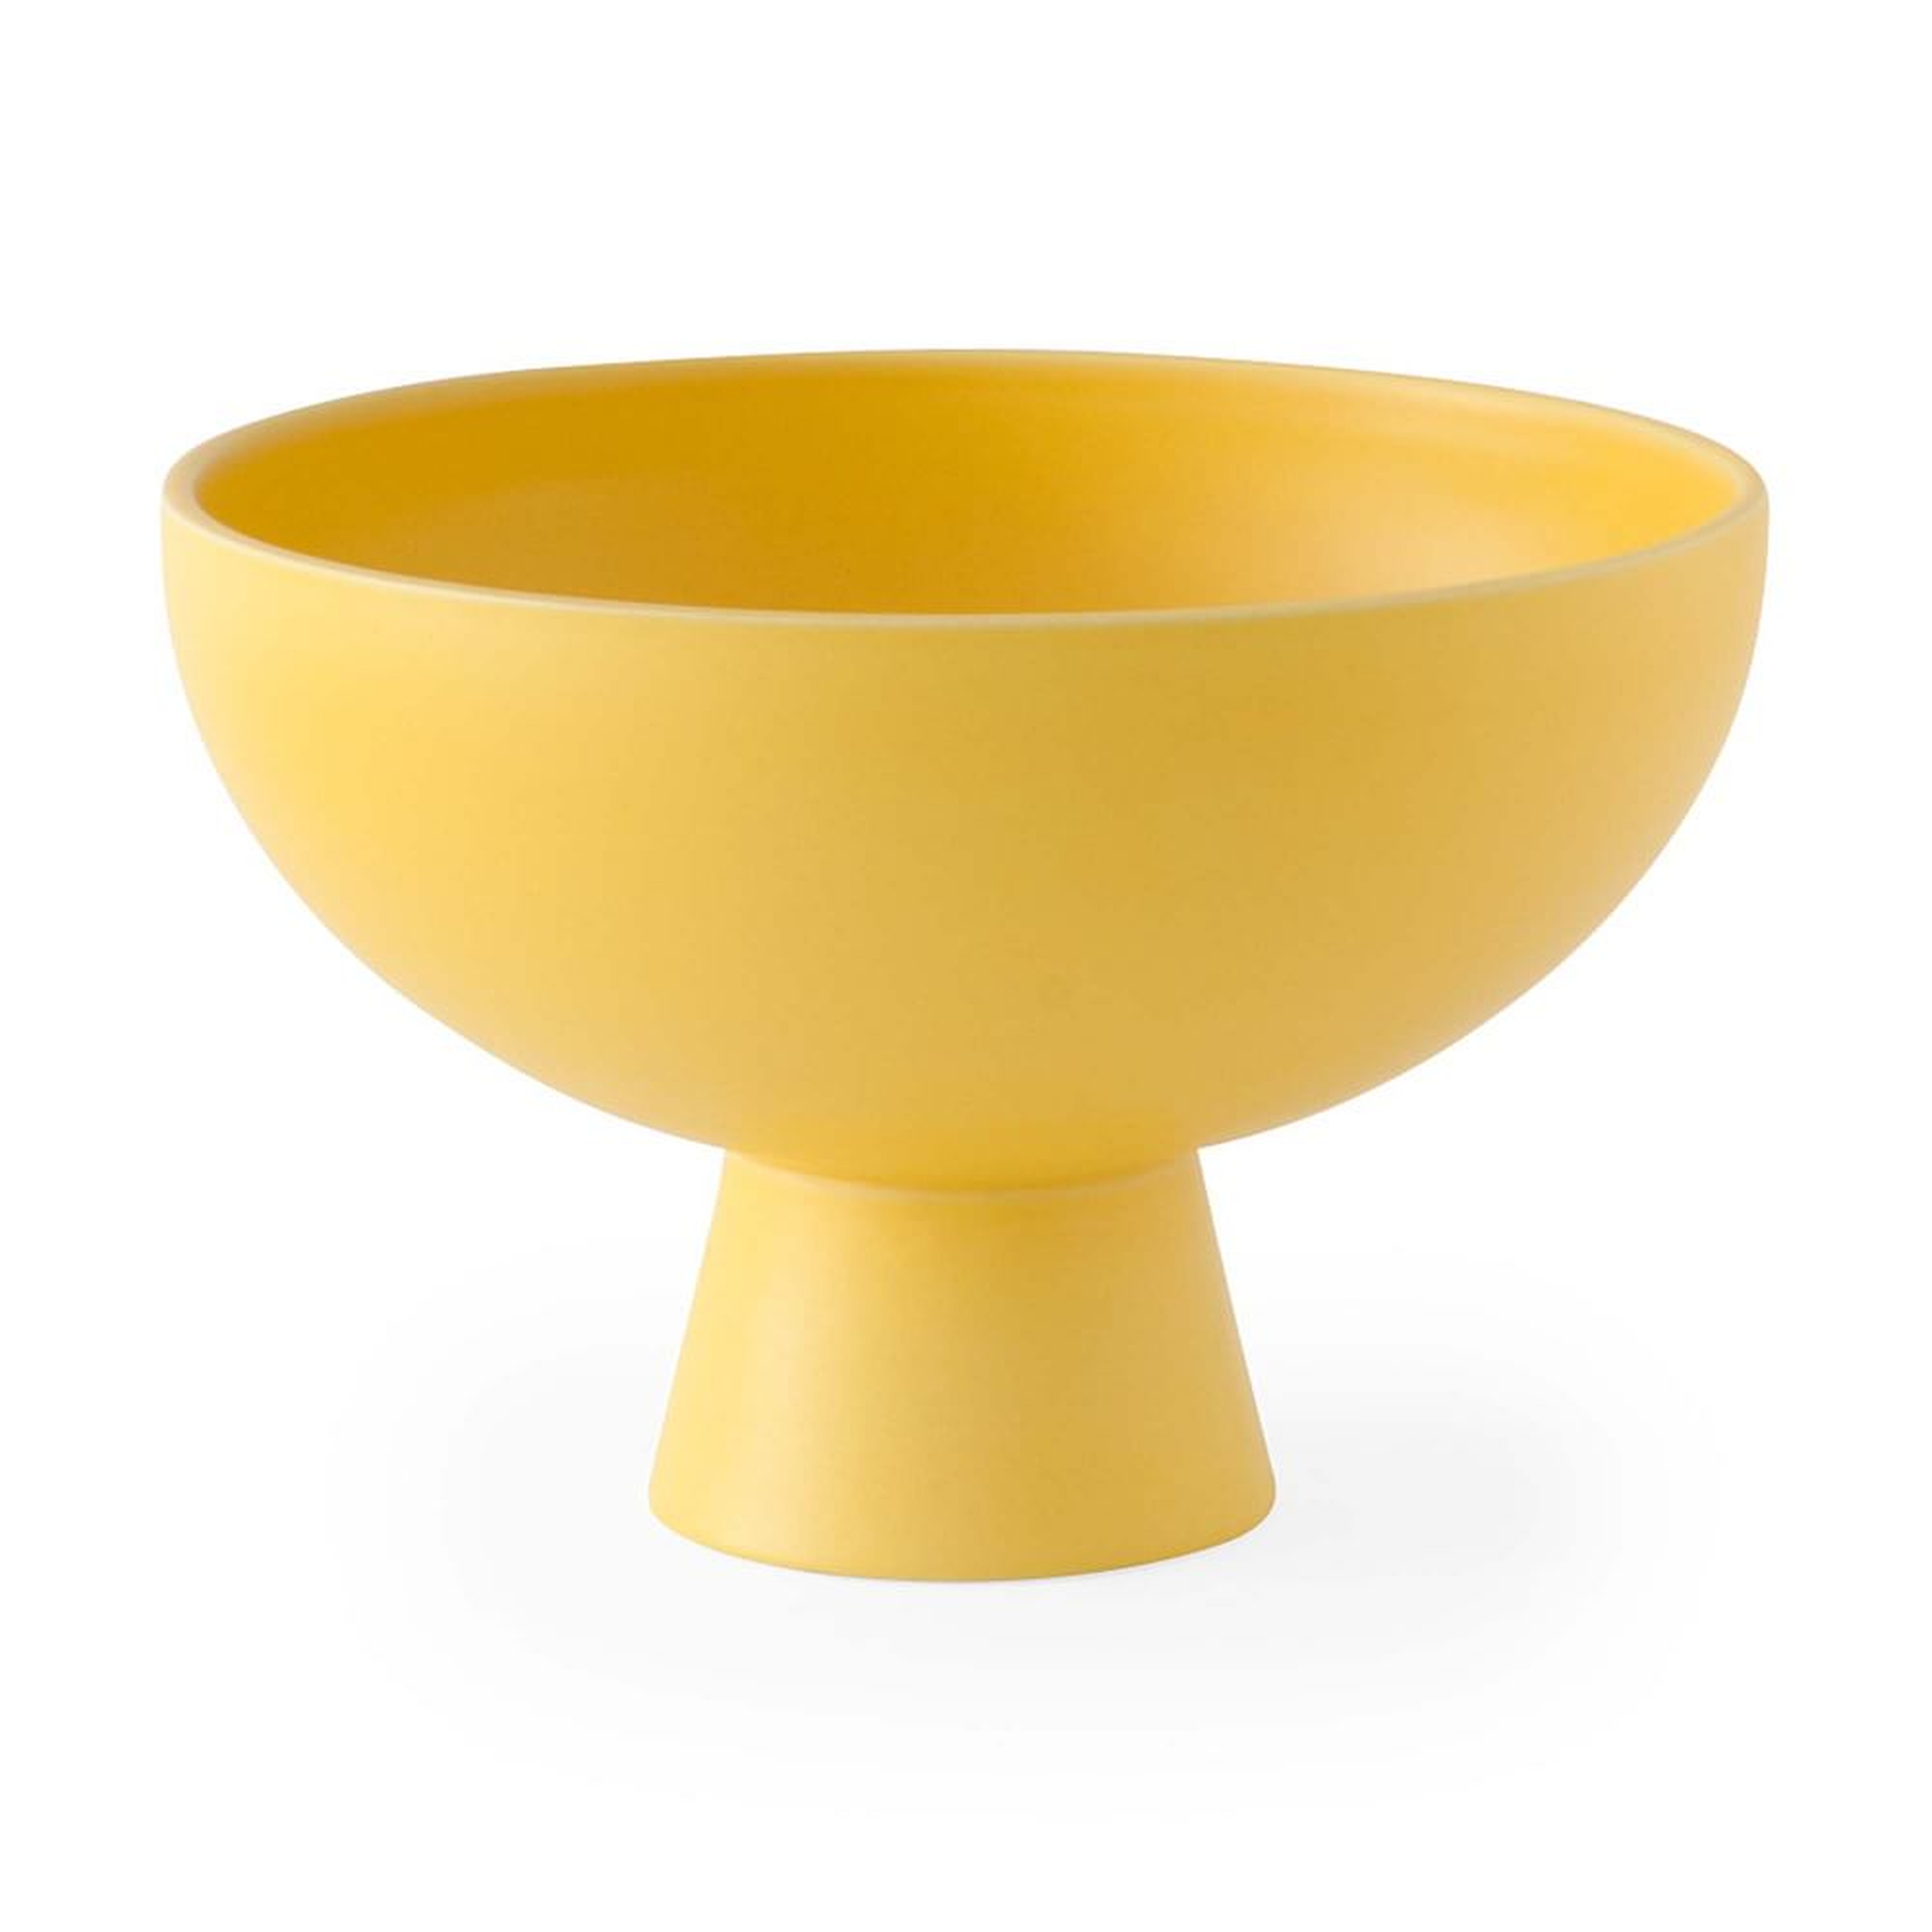 MoMA Collection Raawii Strom Bowl Large, Ceramic, Freesia Yellow - West Elm